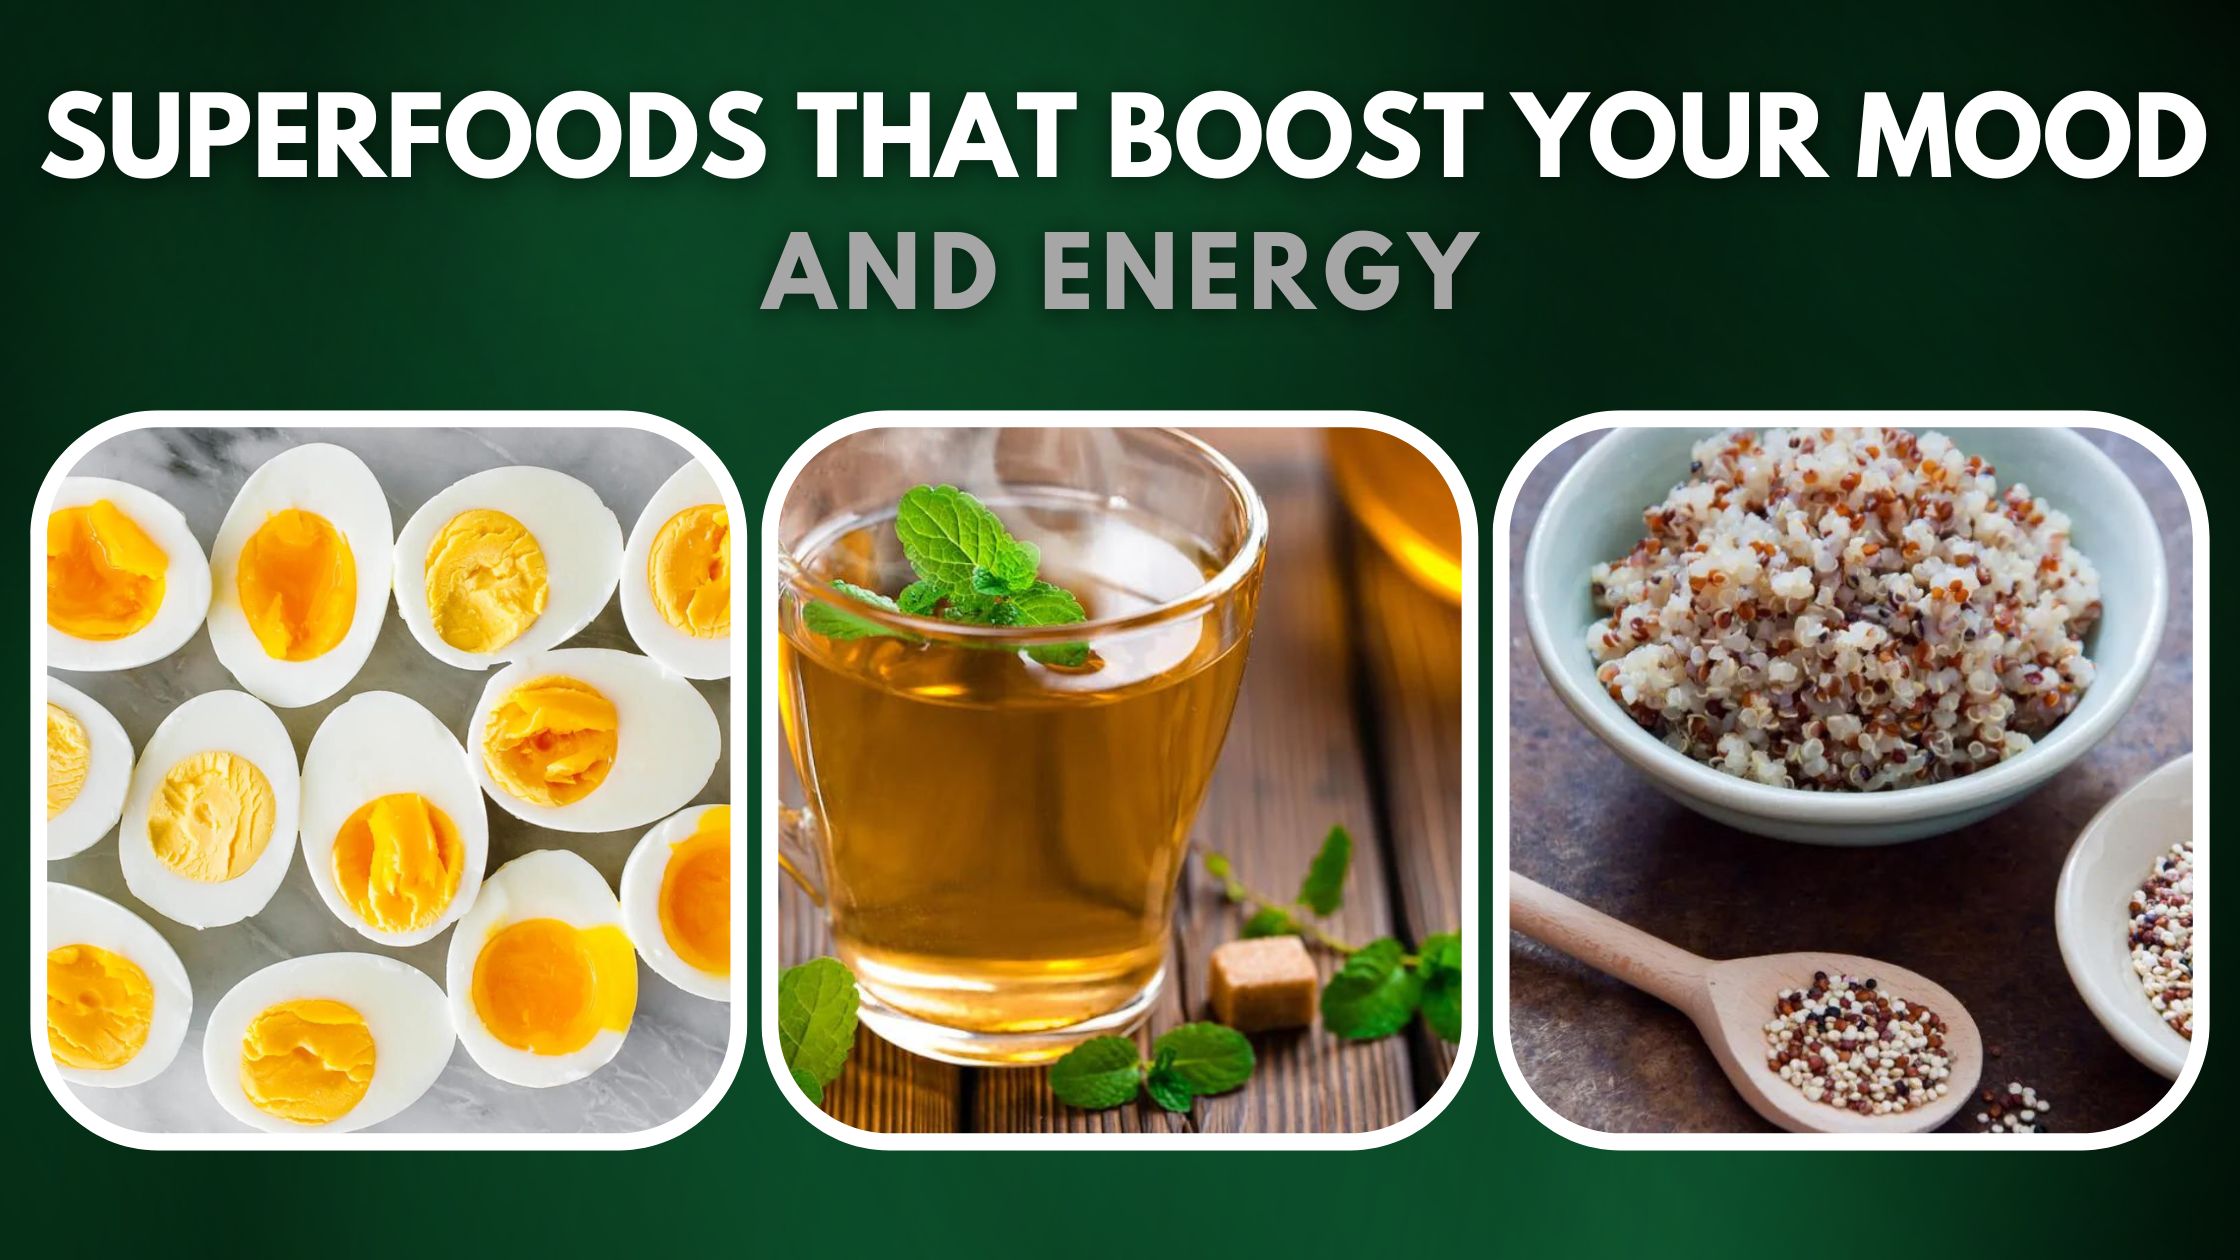 Superfoods that Boost Your Mood and Energy